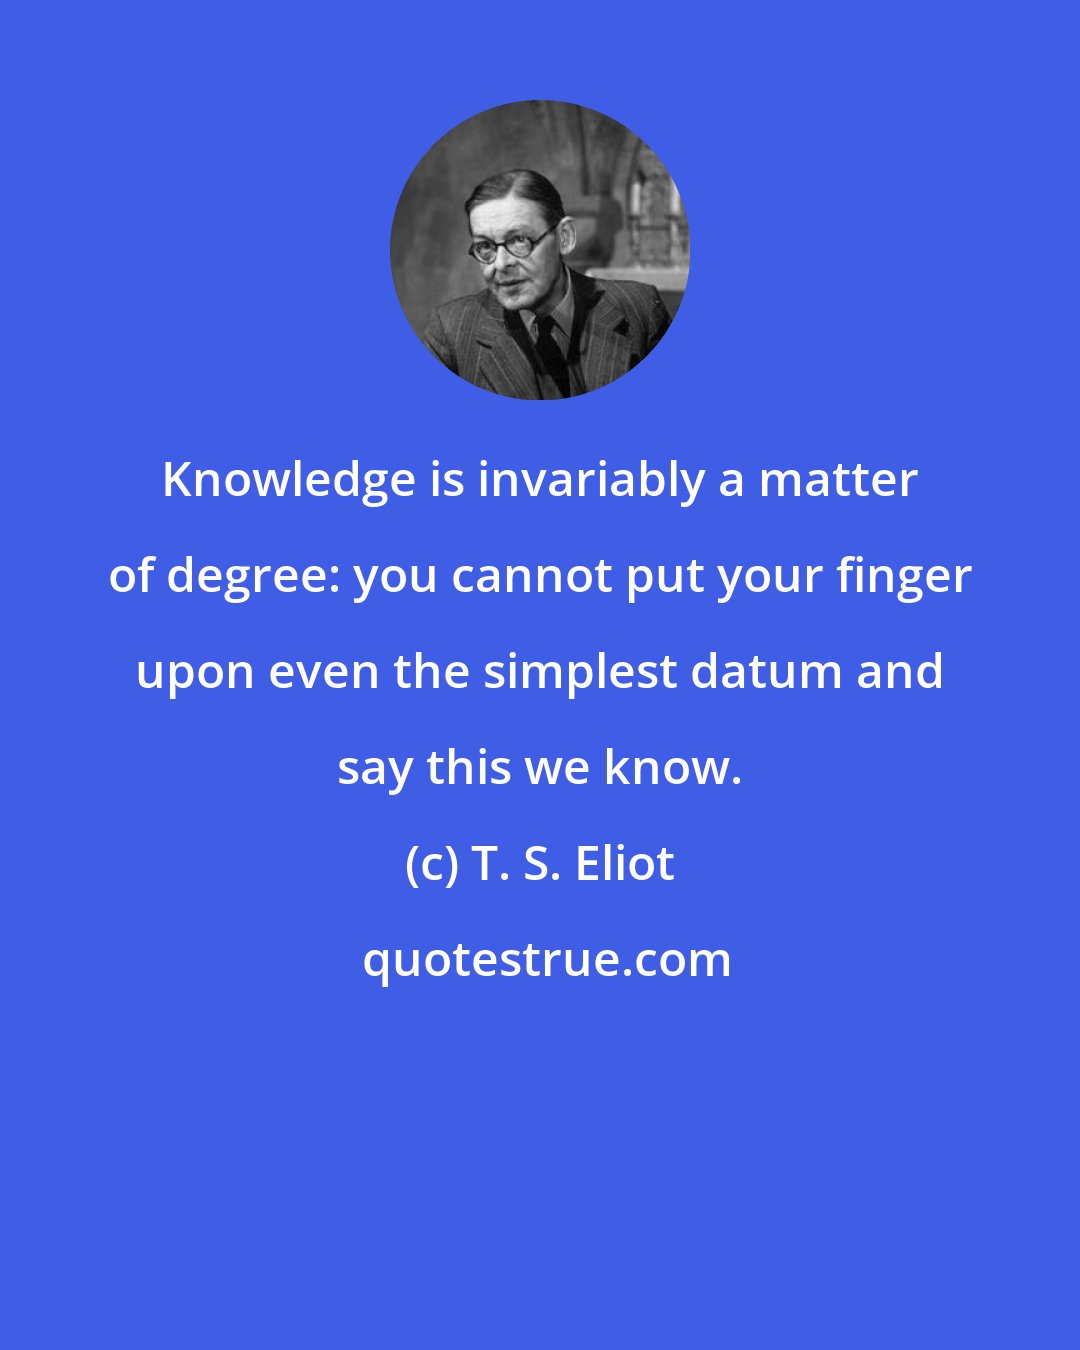 T. S. Eliot: Knowledge is invariably a matter of degree: you cannot put your finger upon even the simplest datum and say this we know.